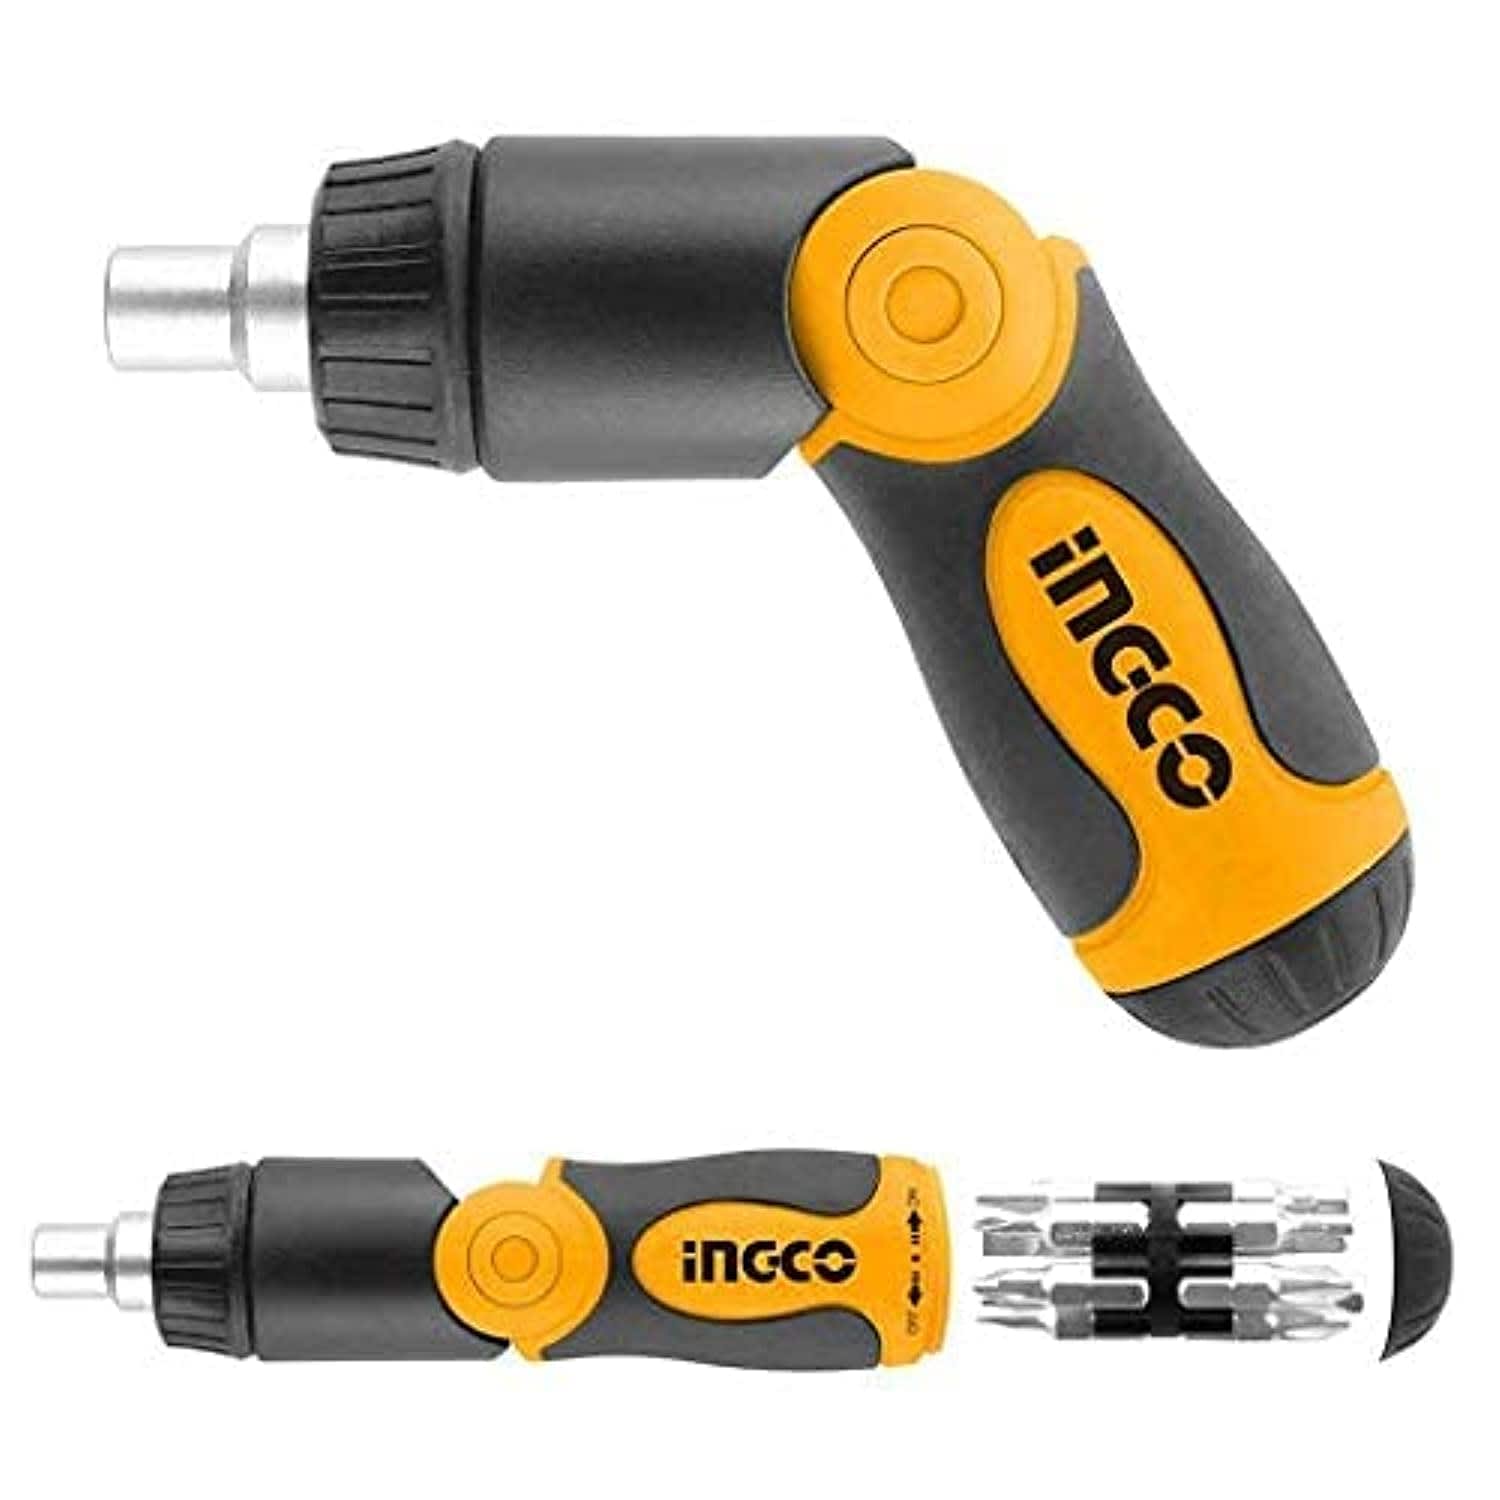 INGCO 13 in 1 Ratchet Screwdriver Set-review-singapore